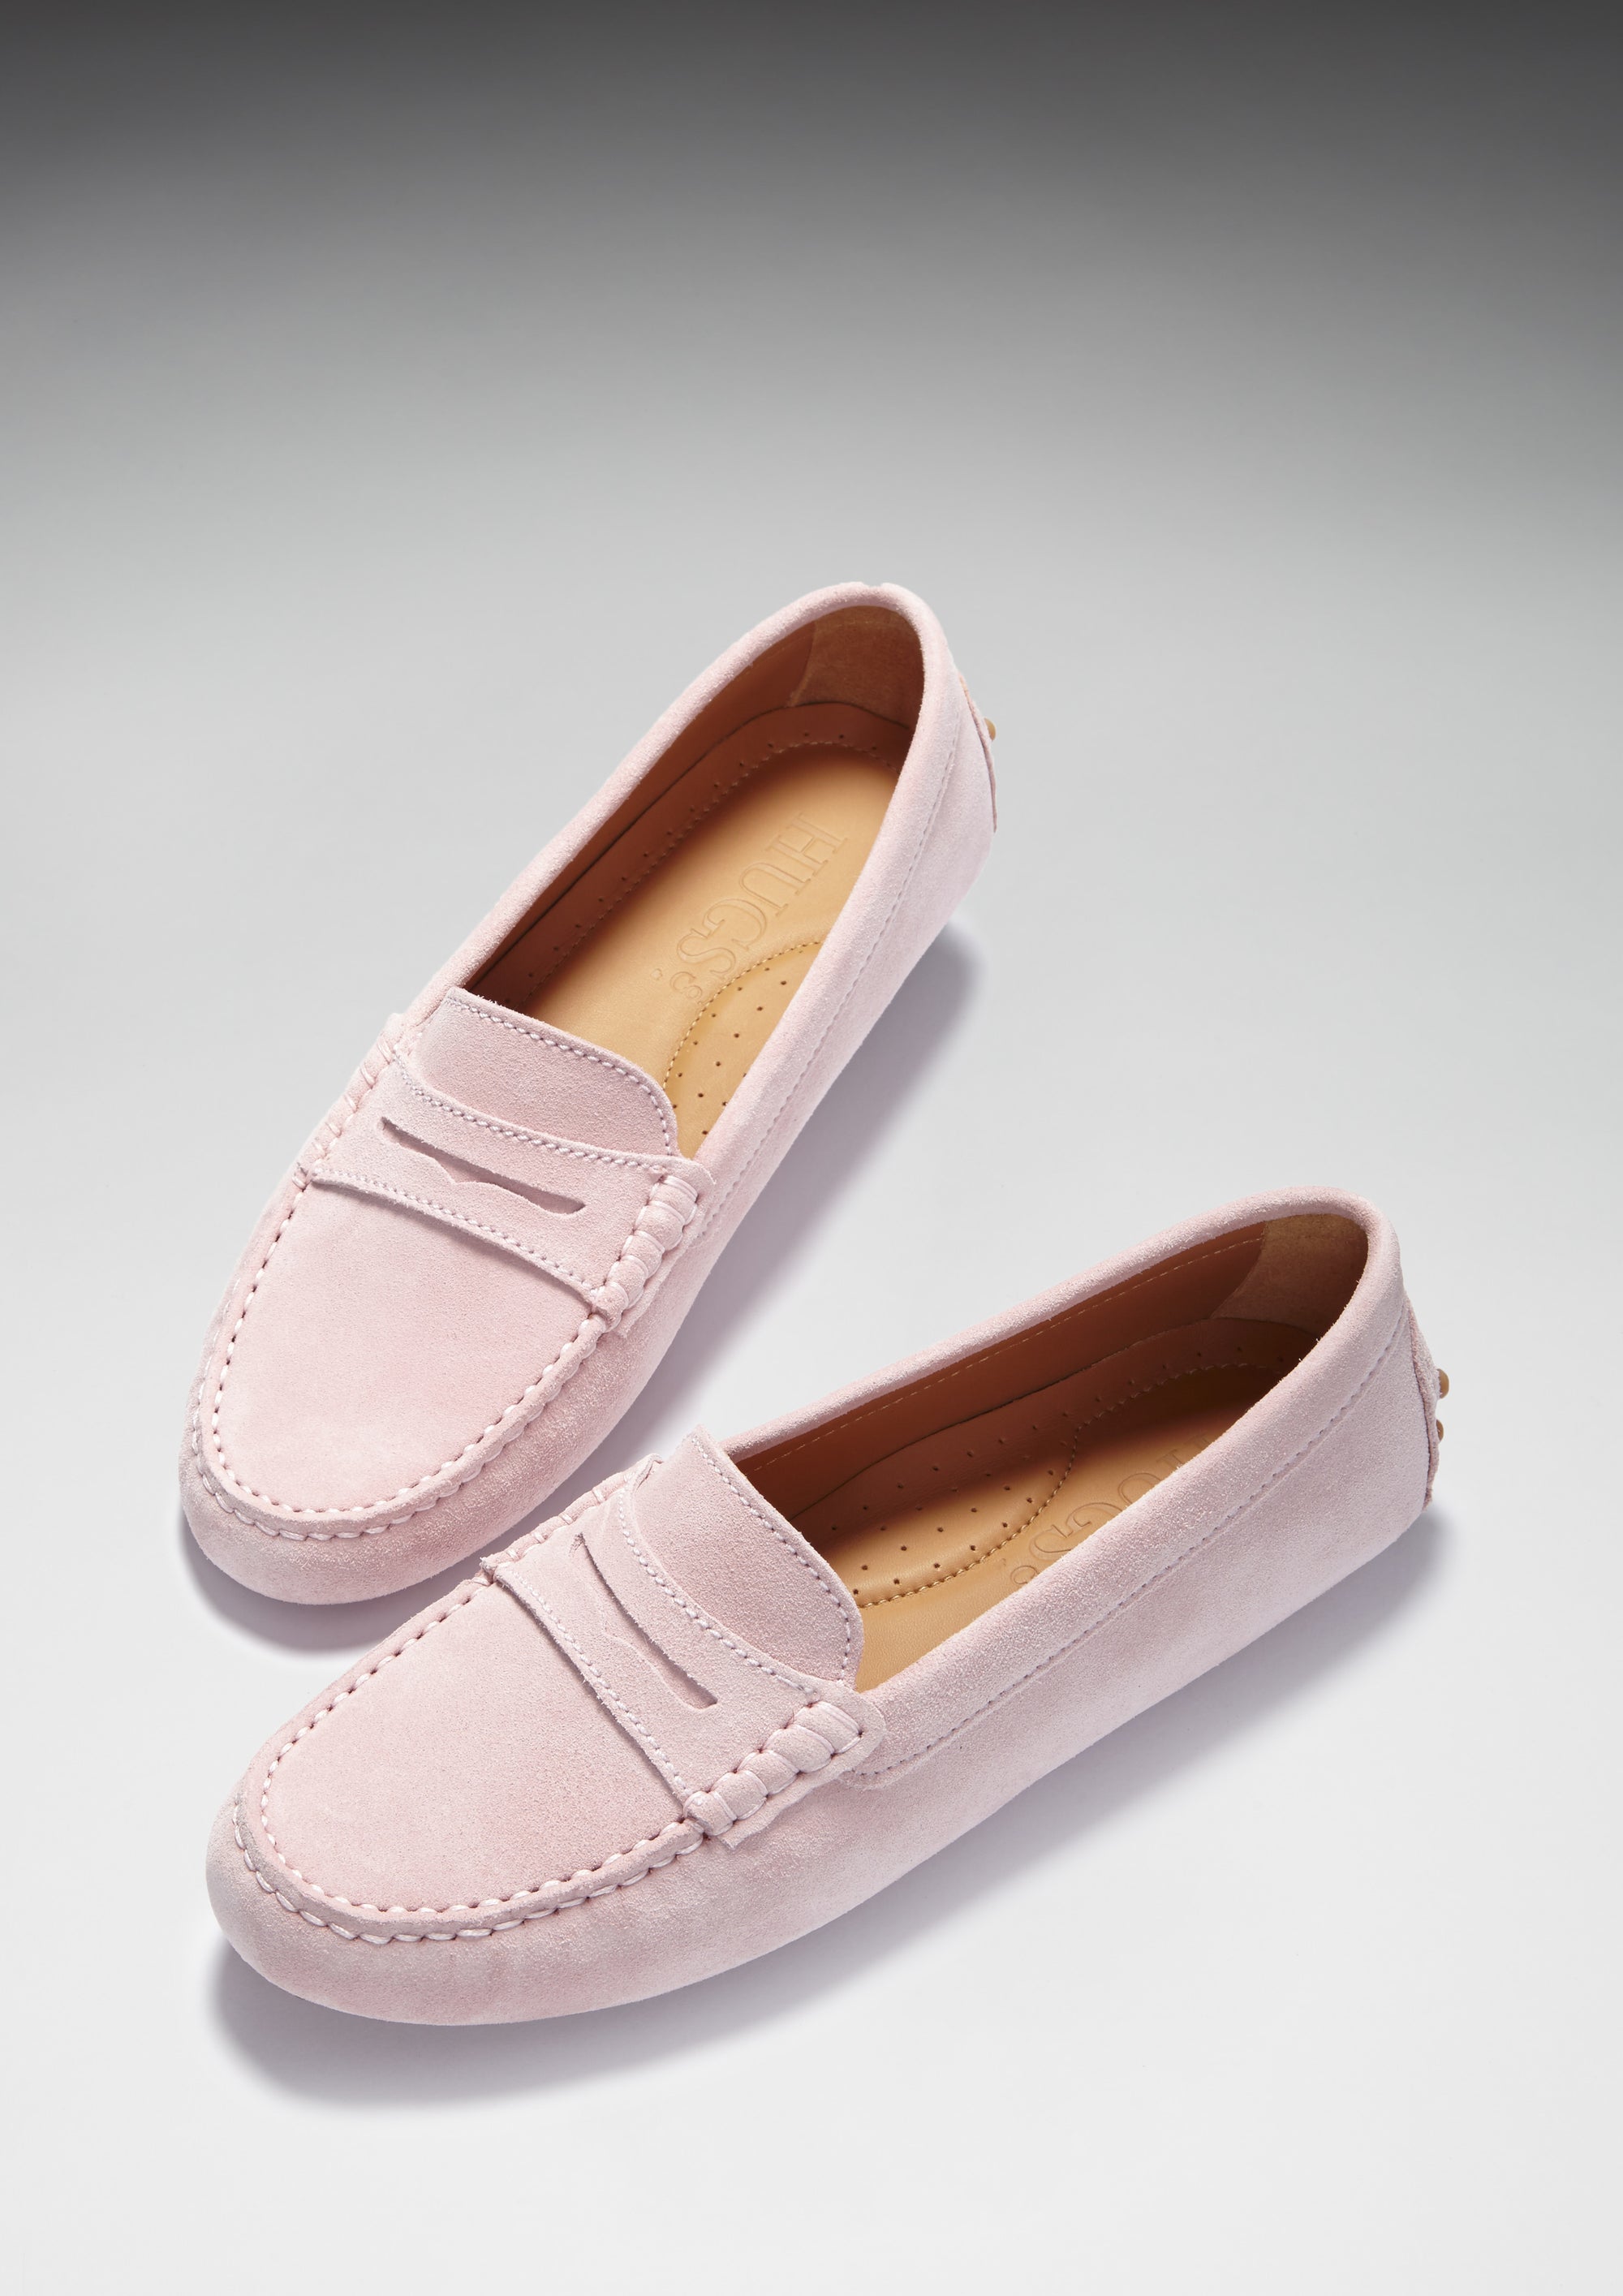 Women's Penny Driving Loafers, ice pink suede - Hugs & Co.